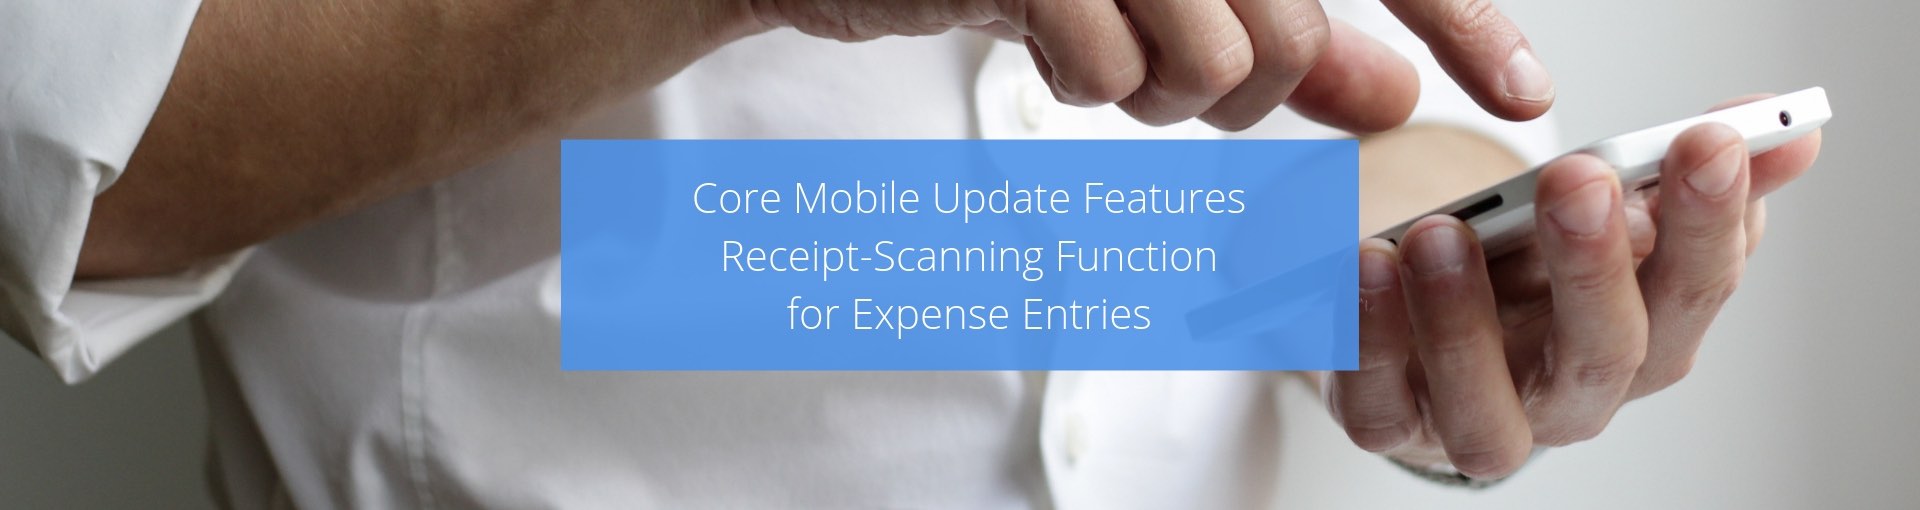 CORE Mobile Receipt Scanning Function for Expense Entries Featured Image